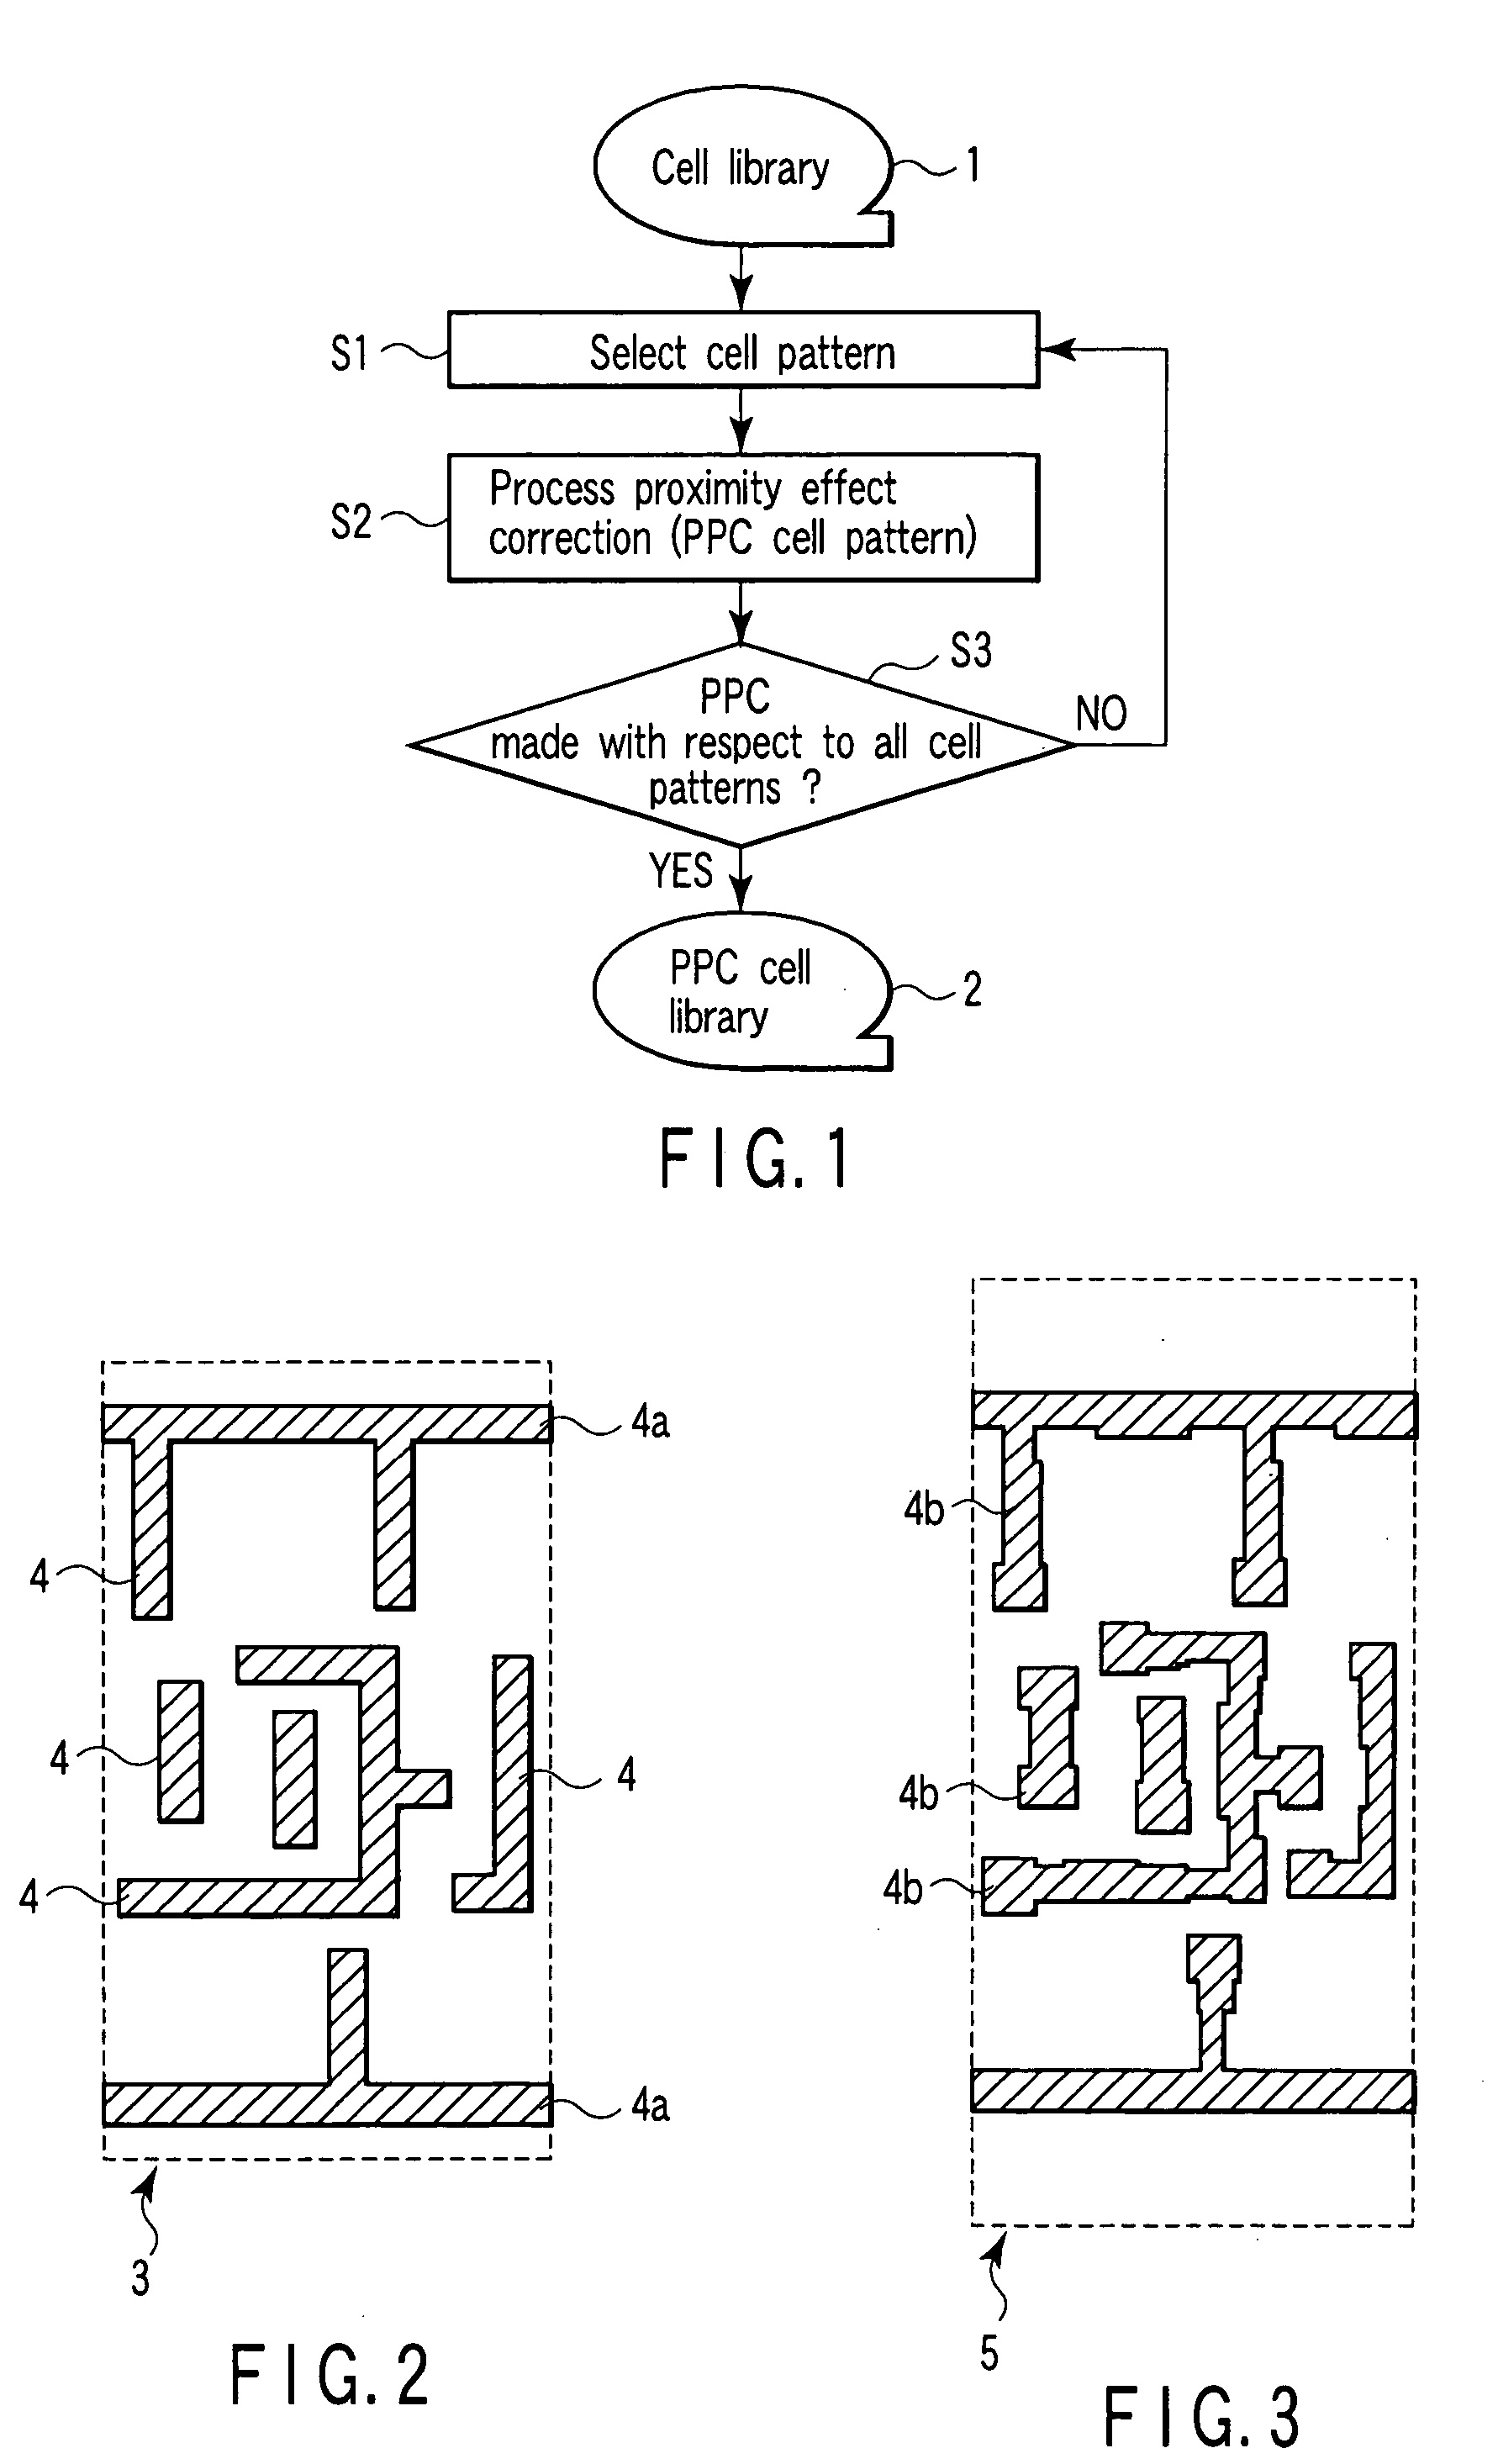 Method and system for forming a mask pattern, method of manufacturing a semiconductor device, system forming a mask pattern on data, cell library and method of forming a photomask